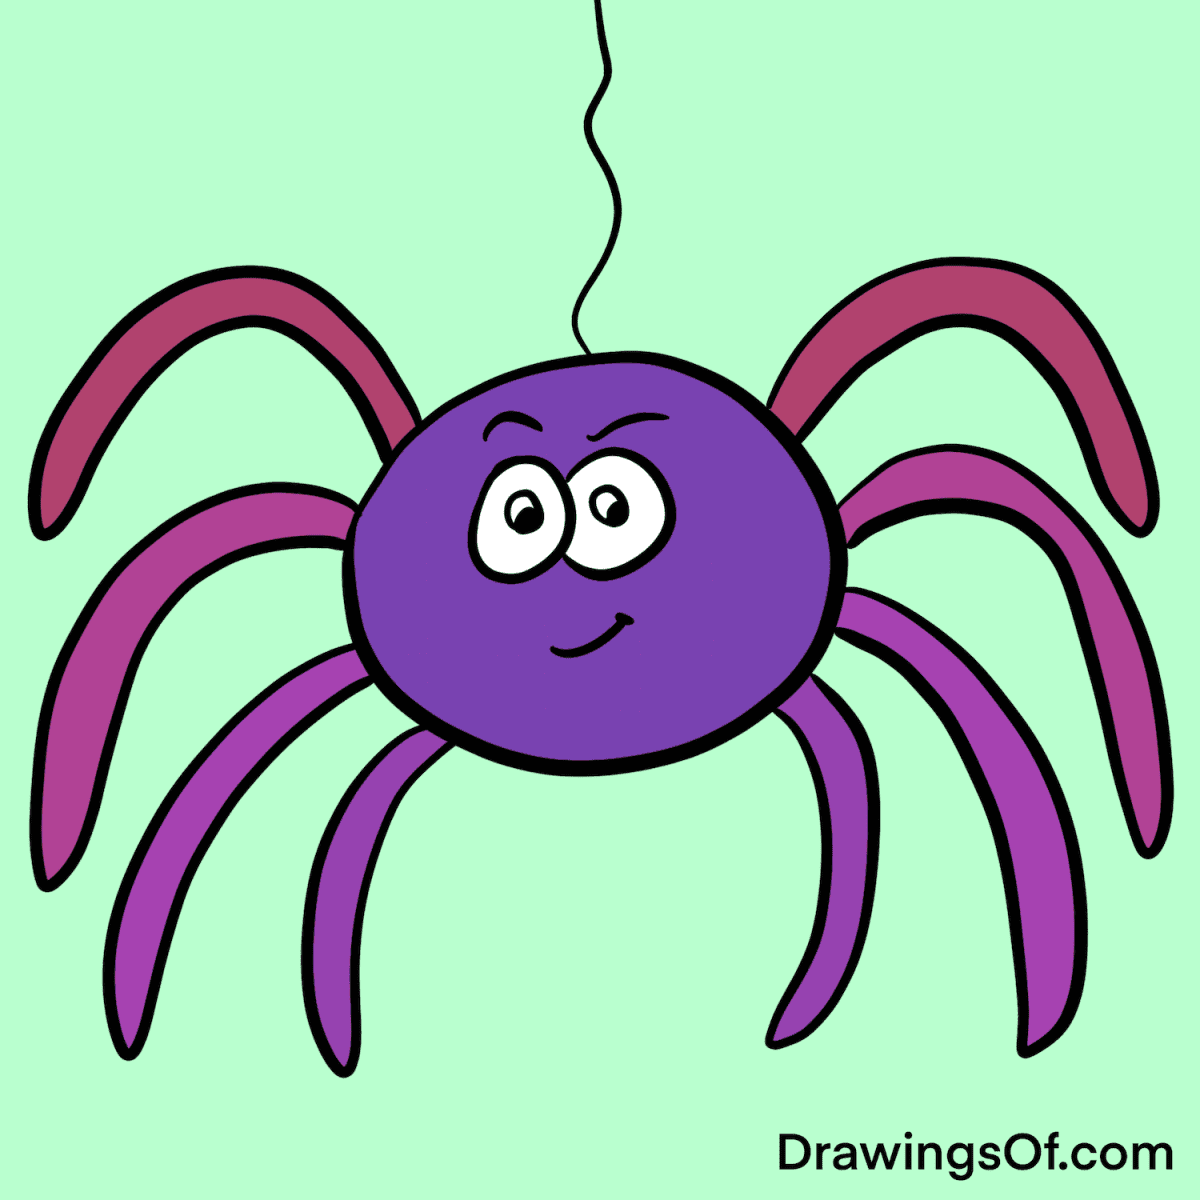 Cute spider drawing easy